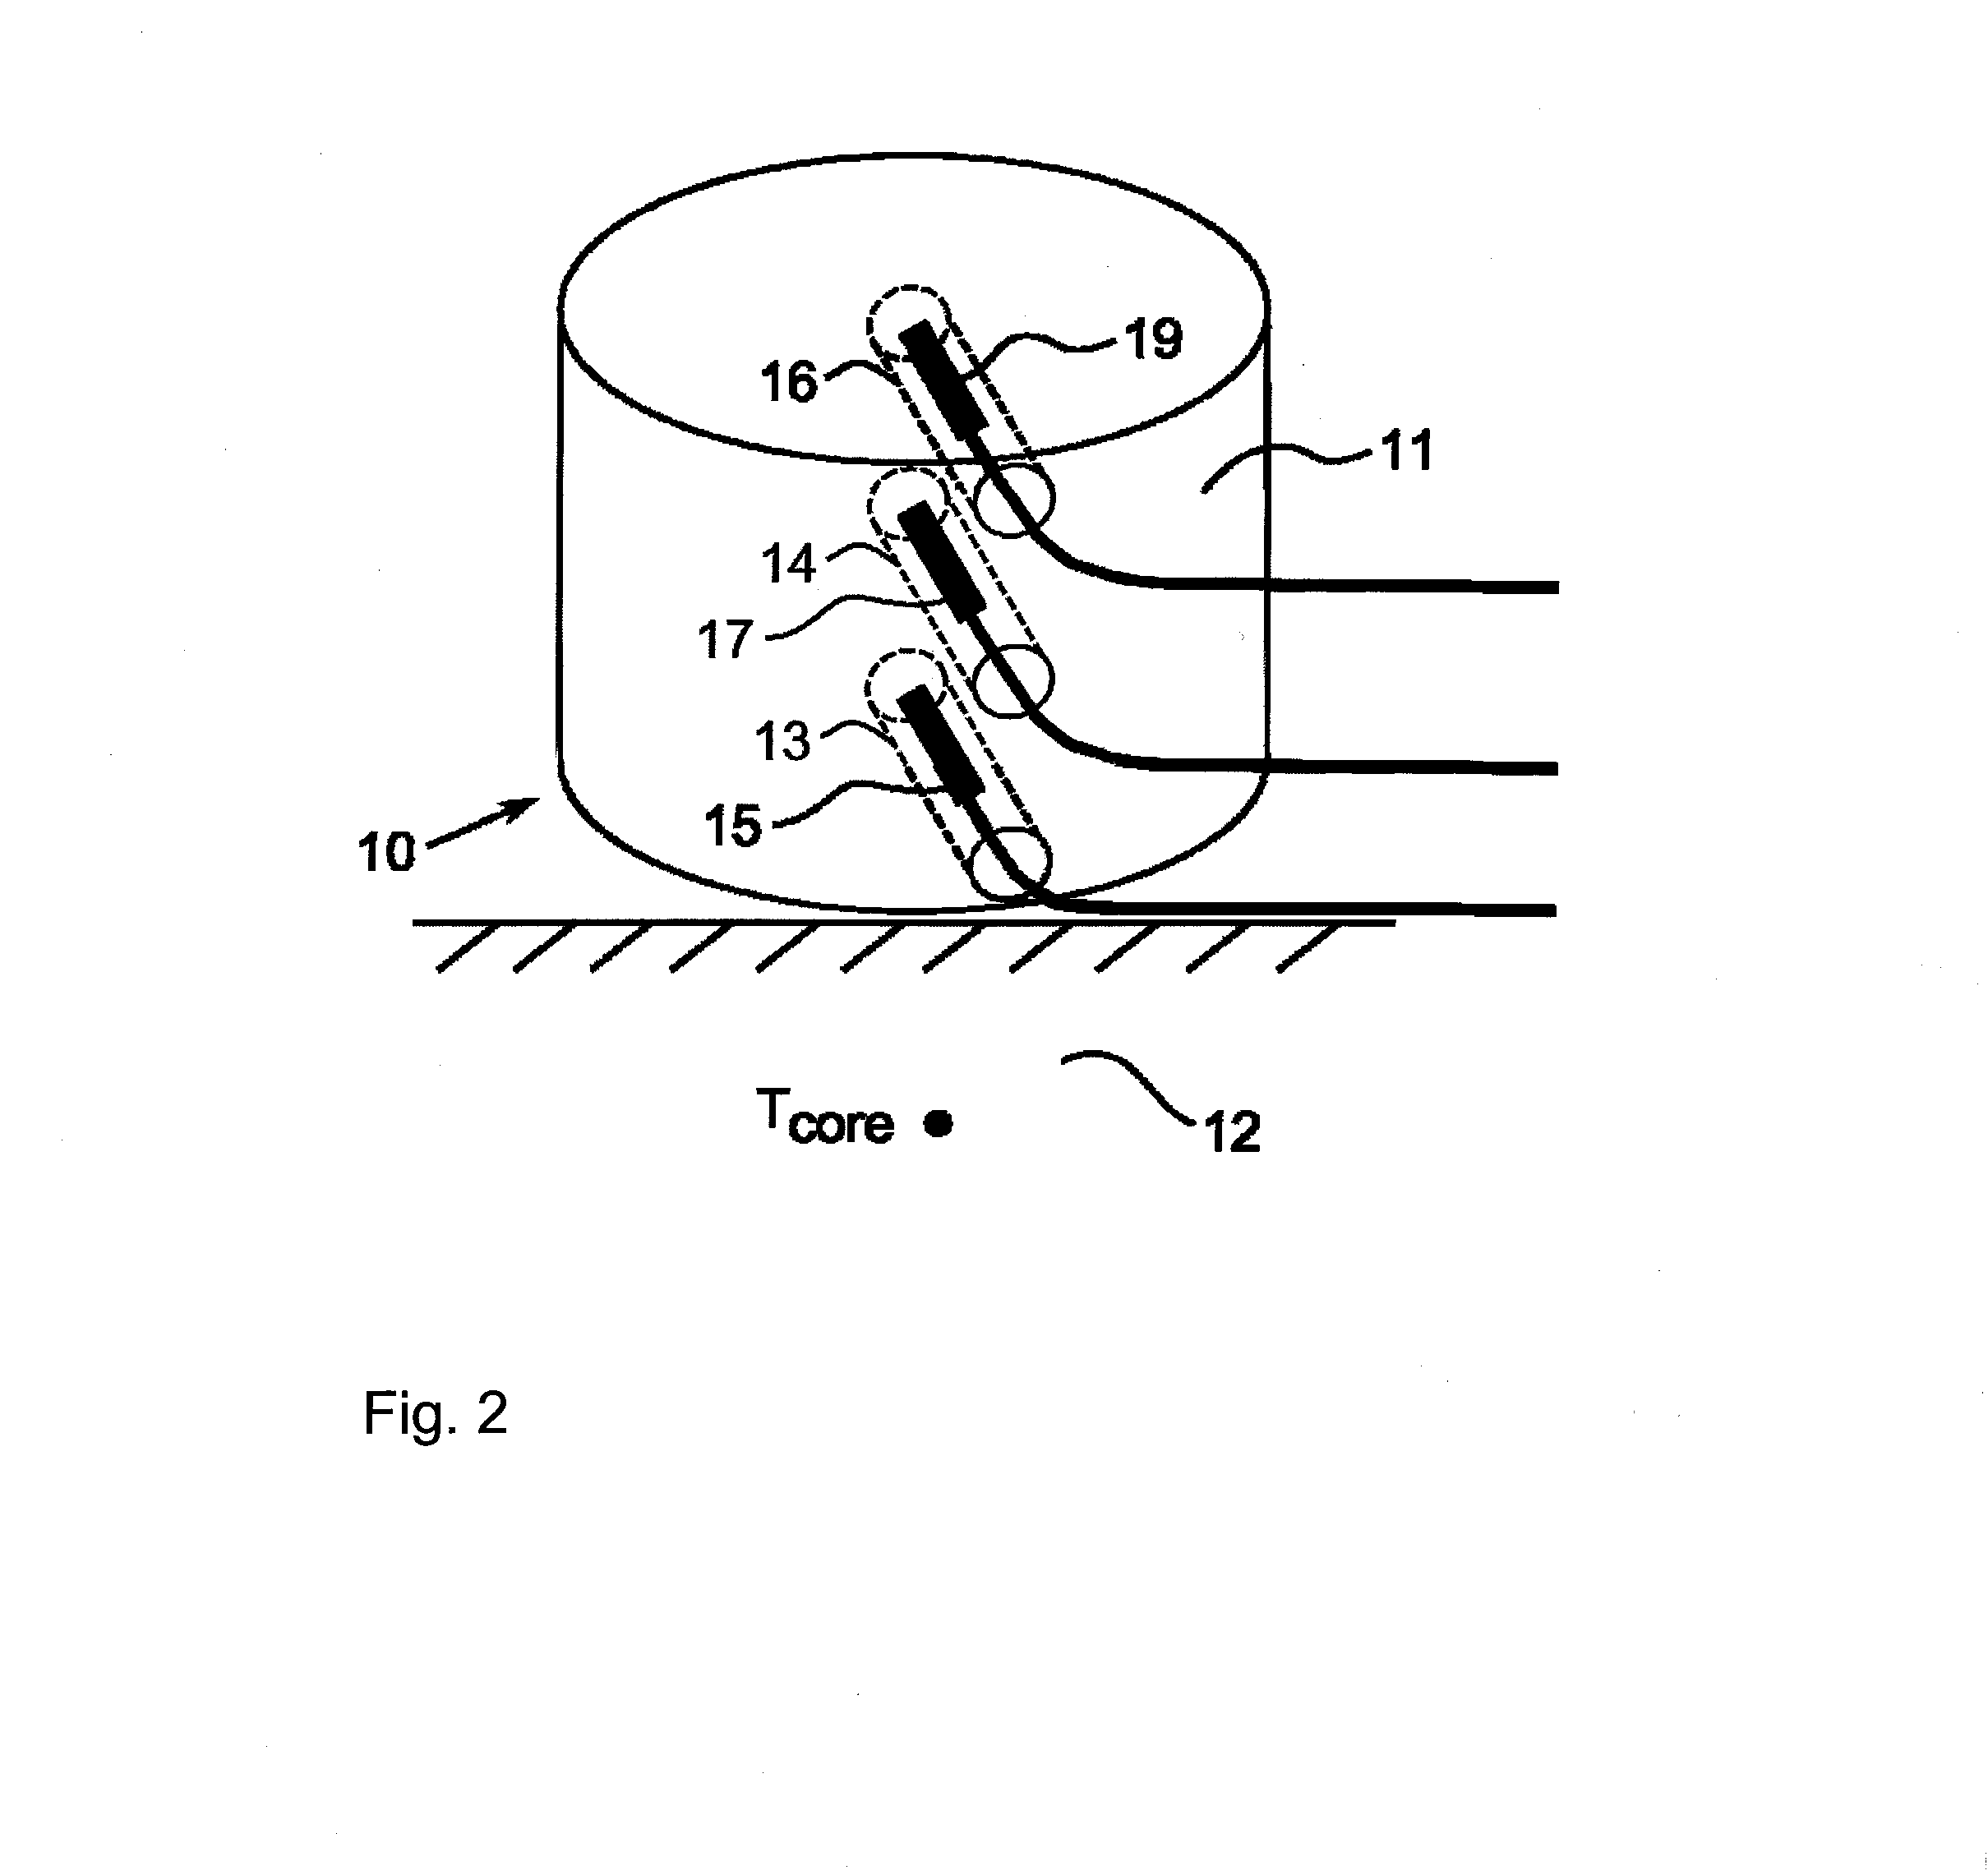 Device and process for determining the body core temperature